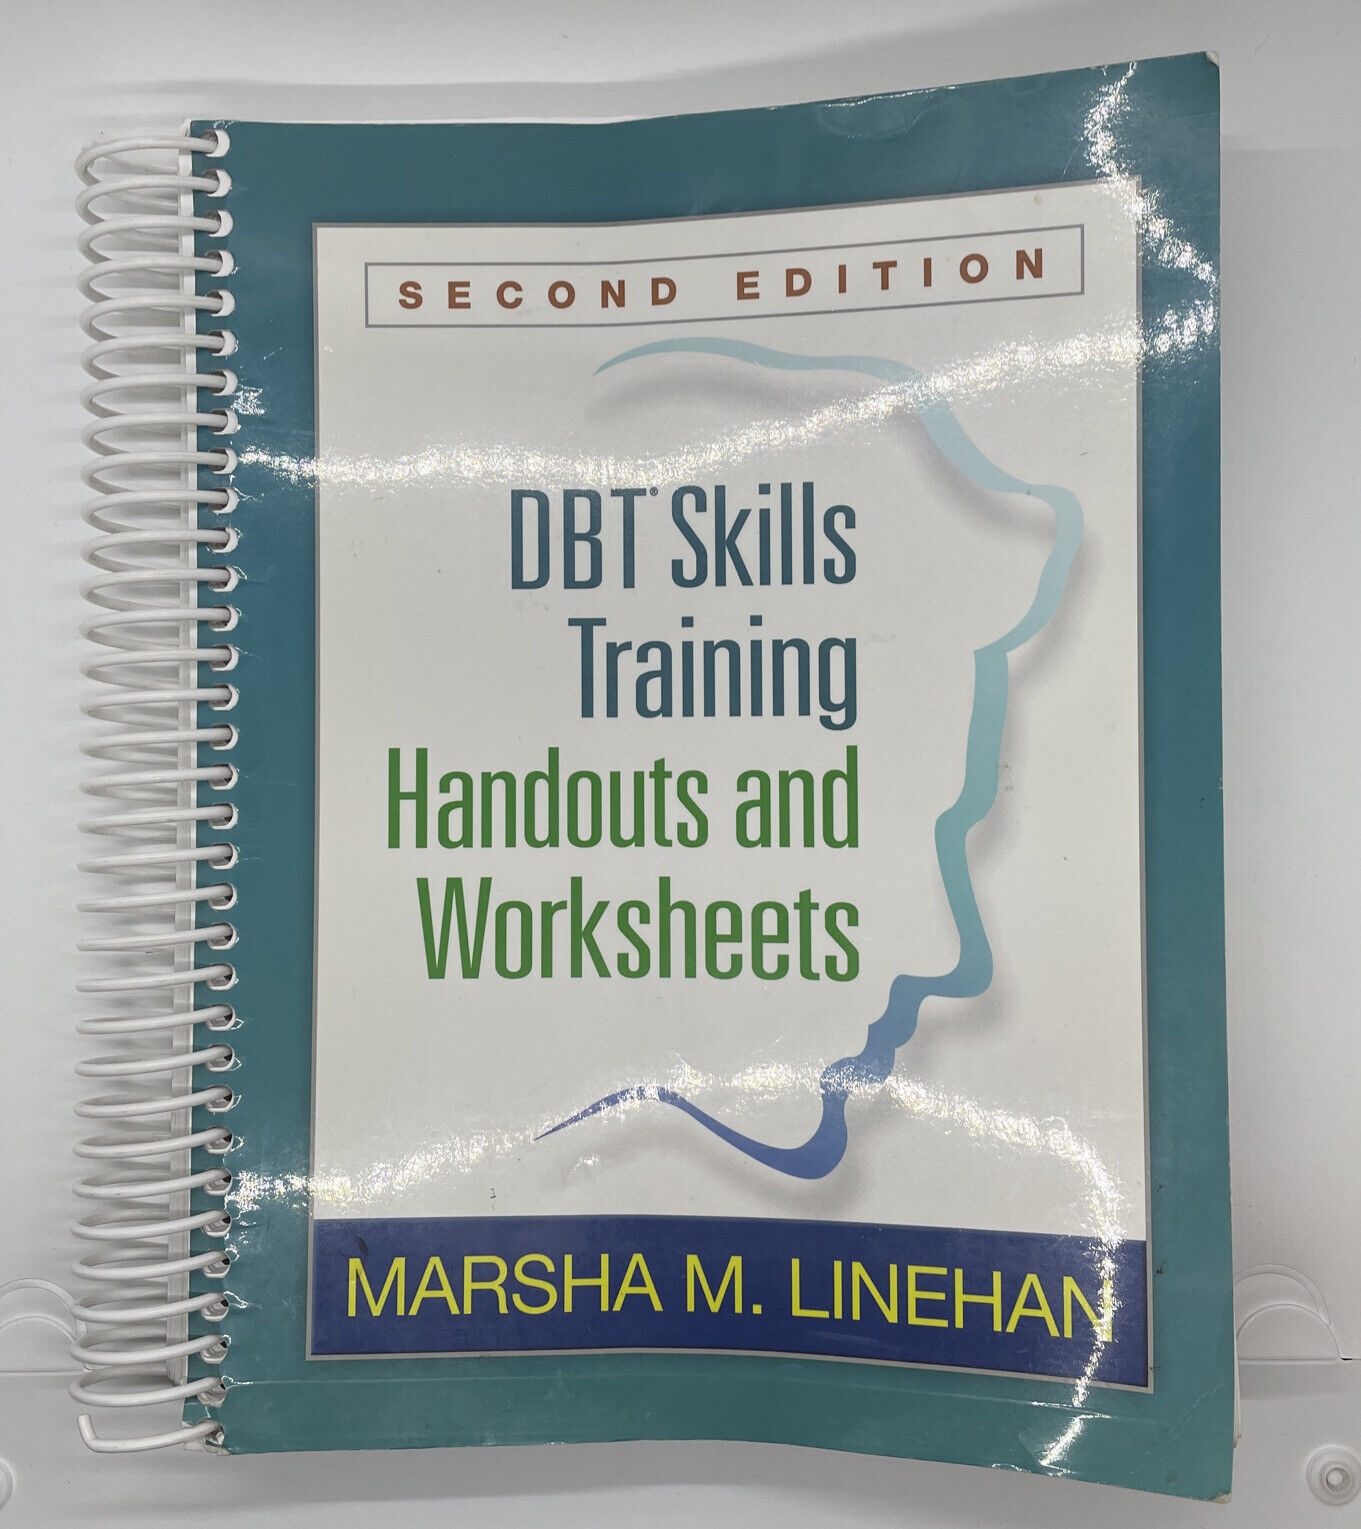 Dbt Skills Training Handouts And Worksheets Second Edition Free Download